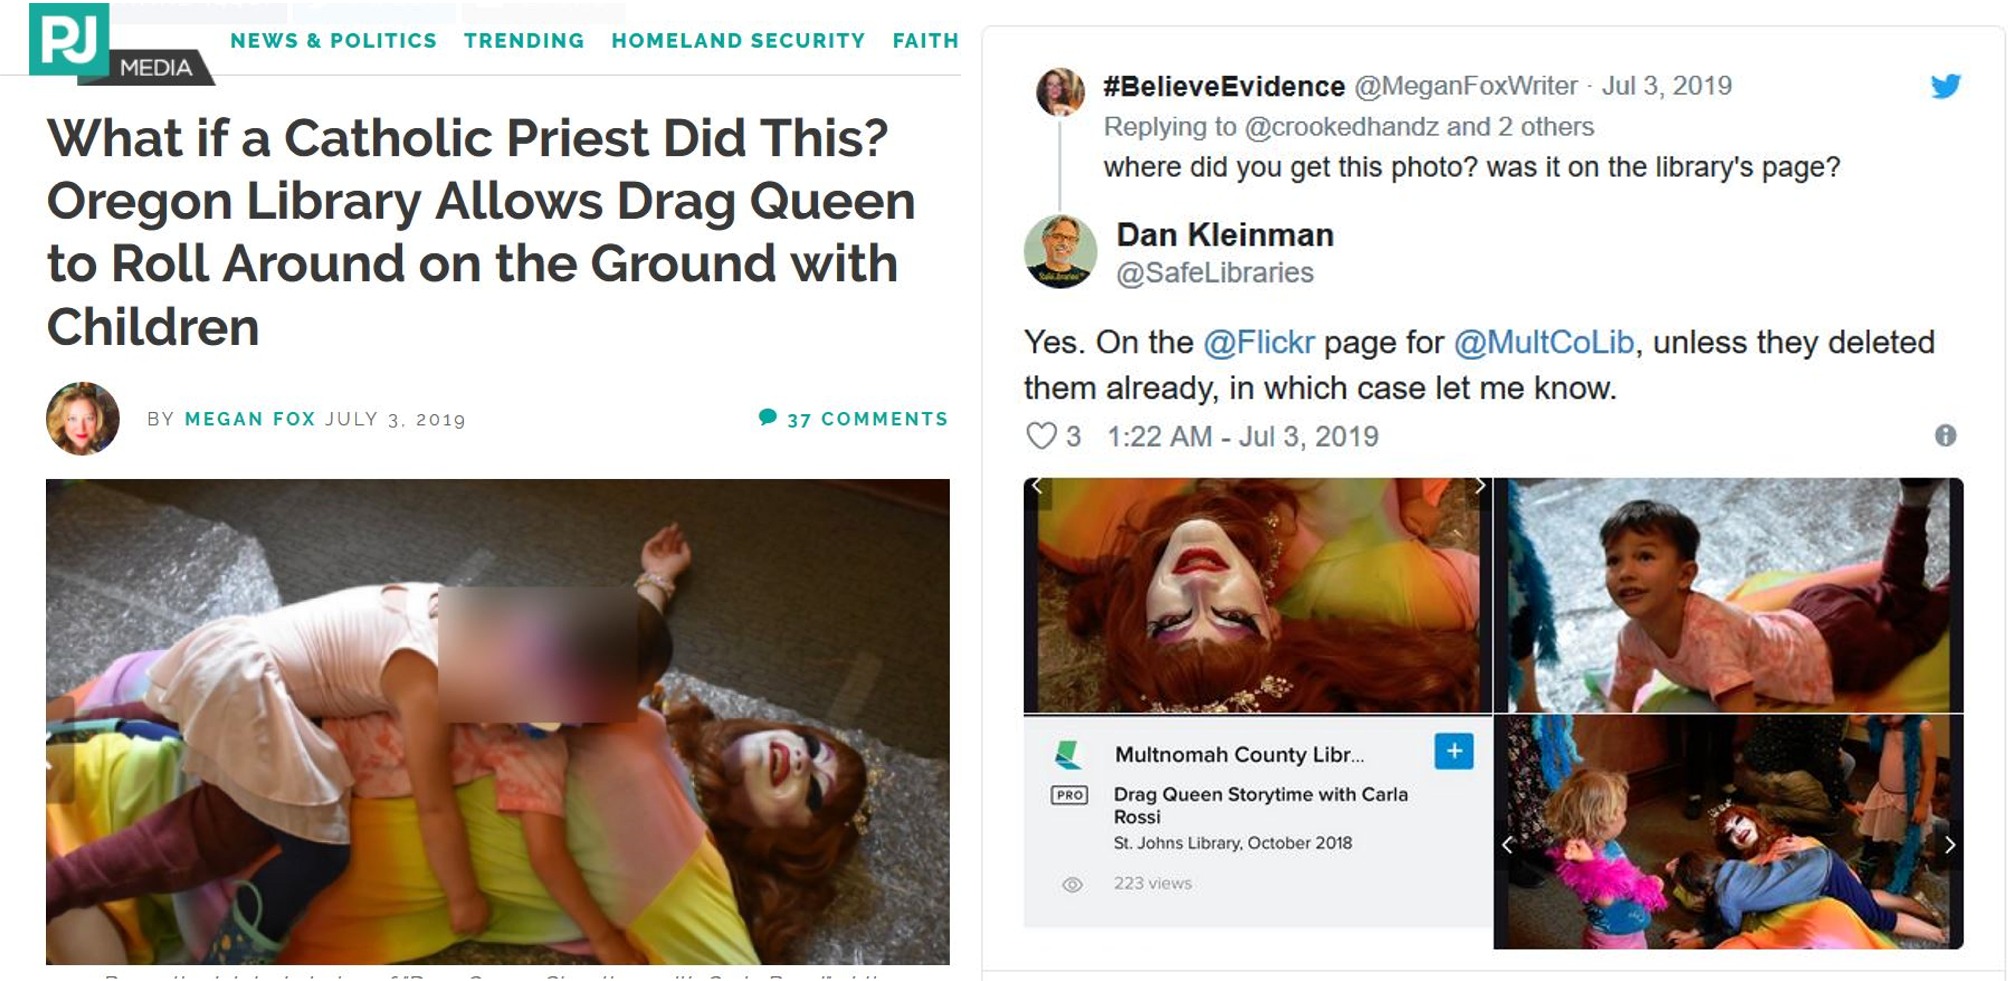 media - Pj Media News & Politics Trending Homeland Security Faith Media Evidence FoxWriter and 2 others where did you get this photo? was it on the library's page? What if a Catholic Priest Did This? Oregon Library Allows Drag Queen to Roll Around on the 